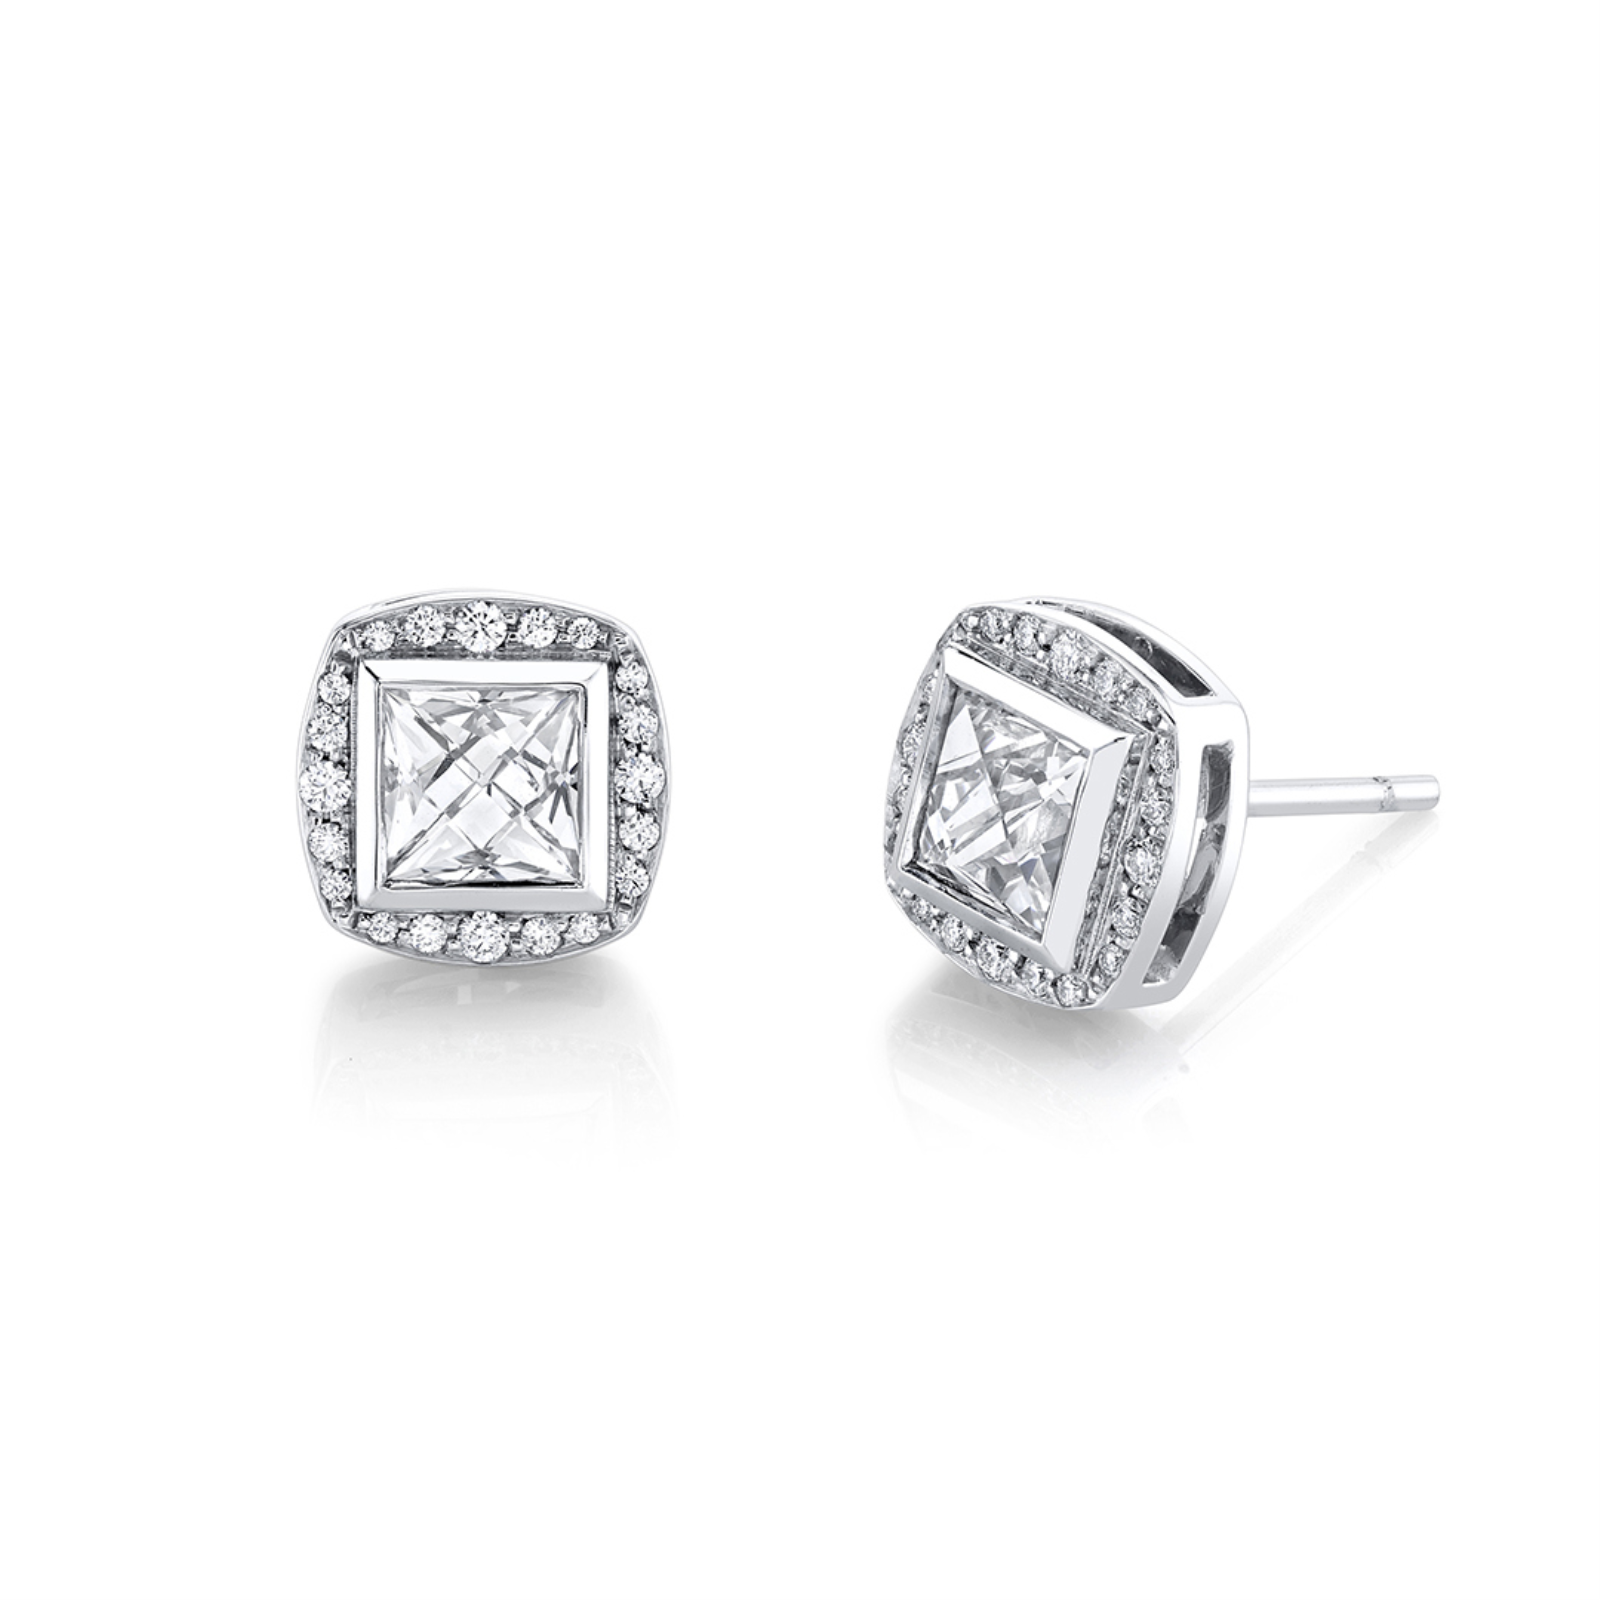 Platinum and Diamond Square French Cut Stud Earrings